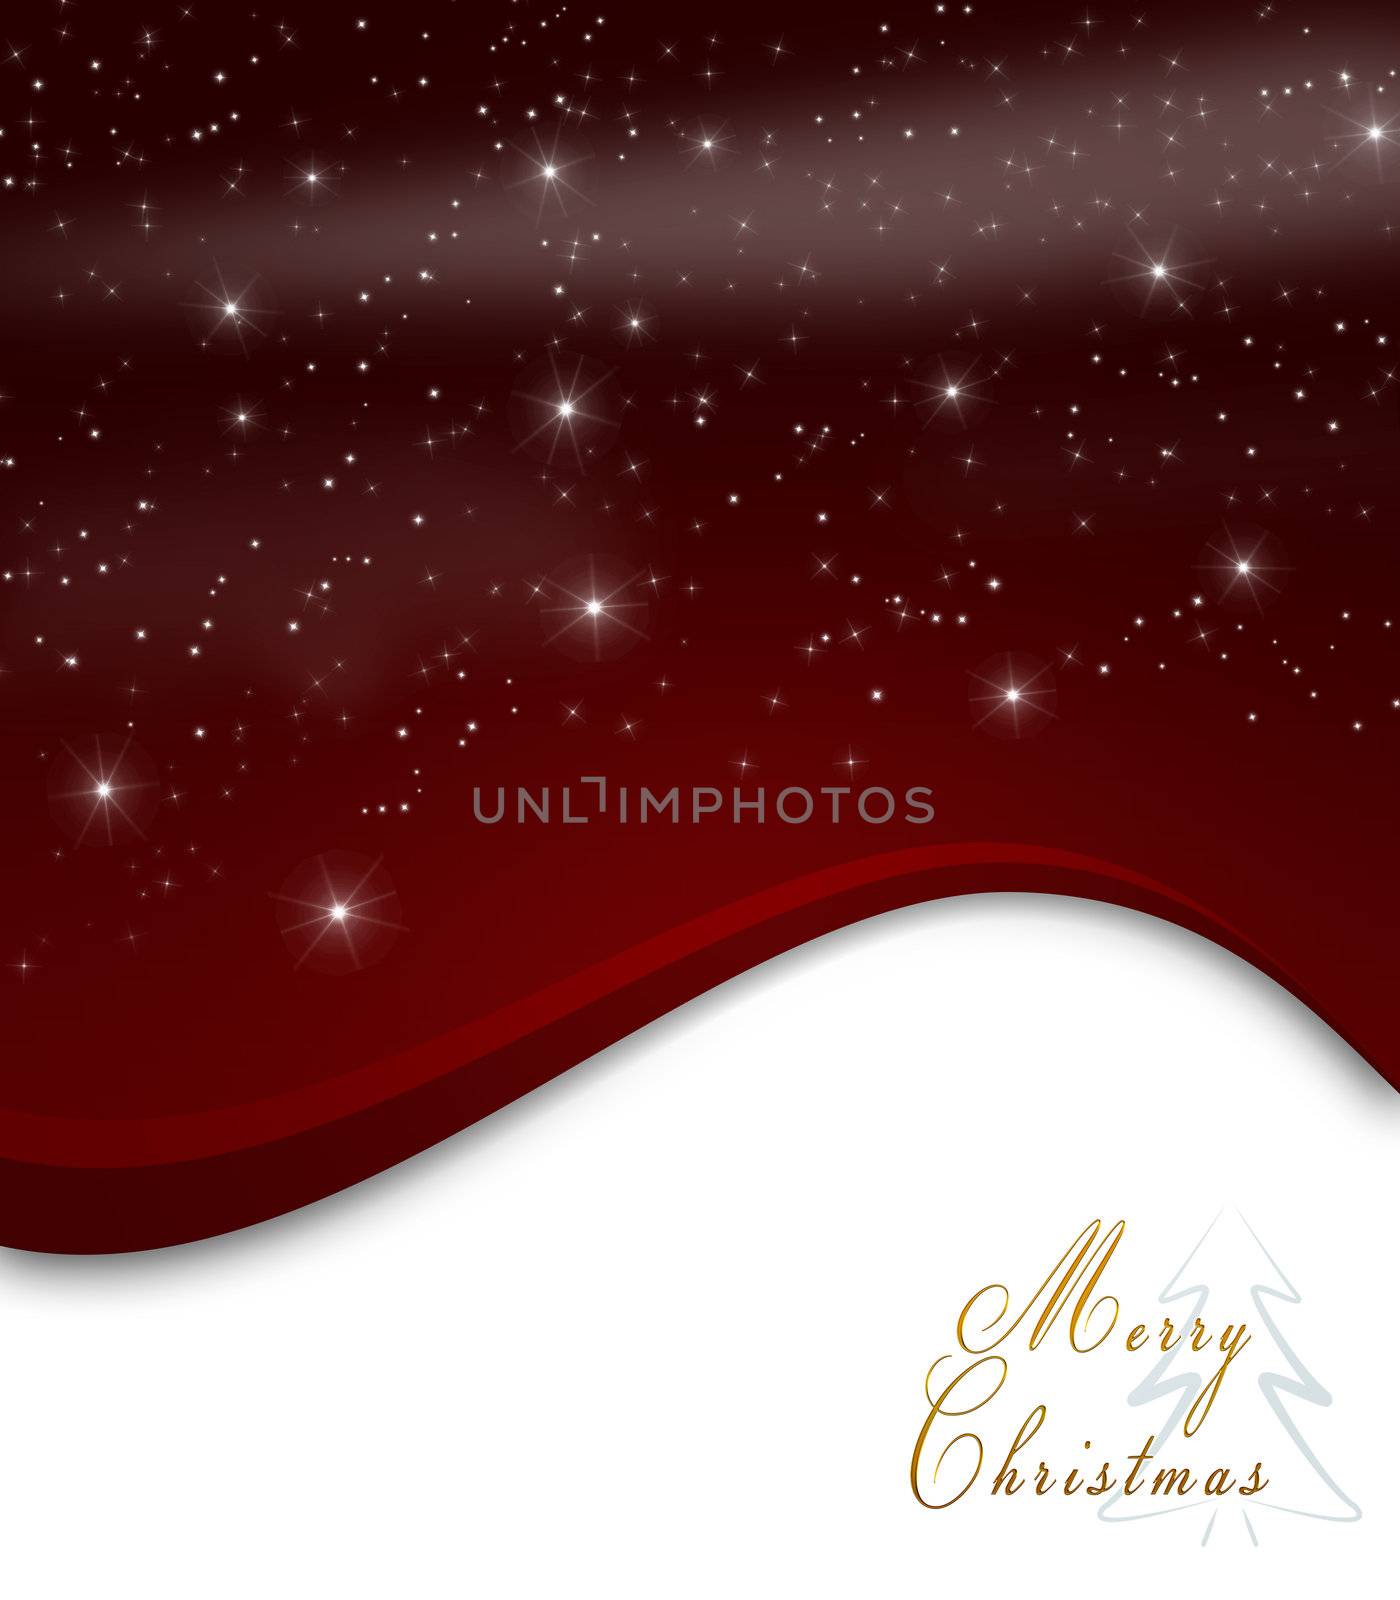 red Christmas background with white snowflakes, stars and Merry Christmas text